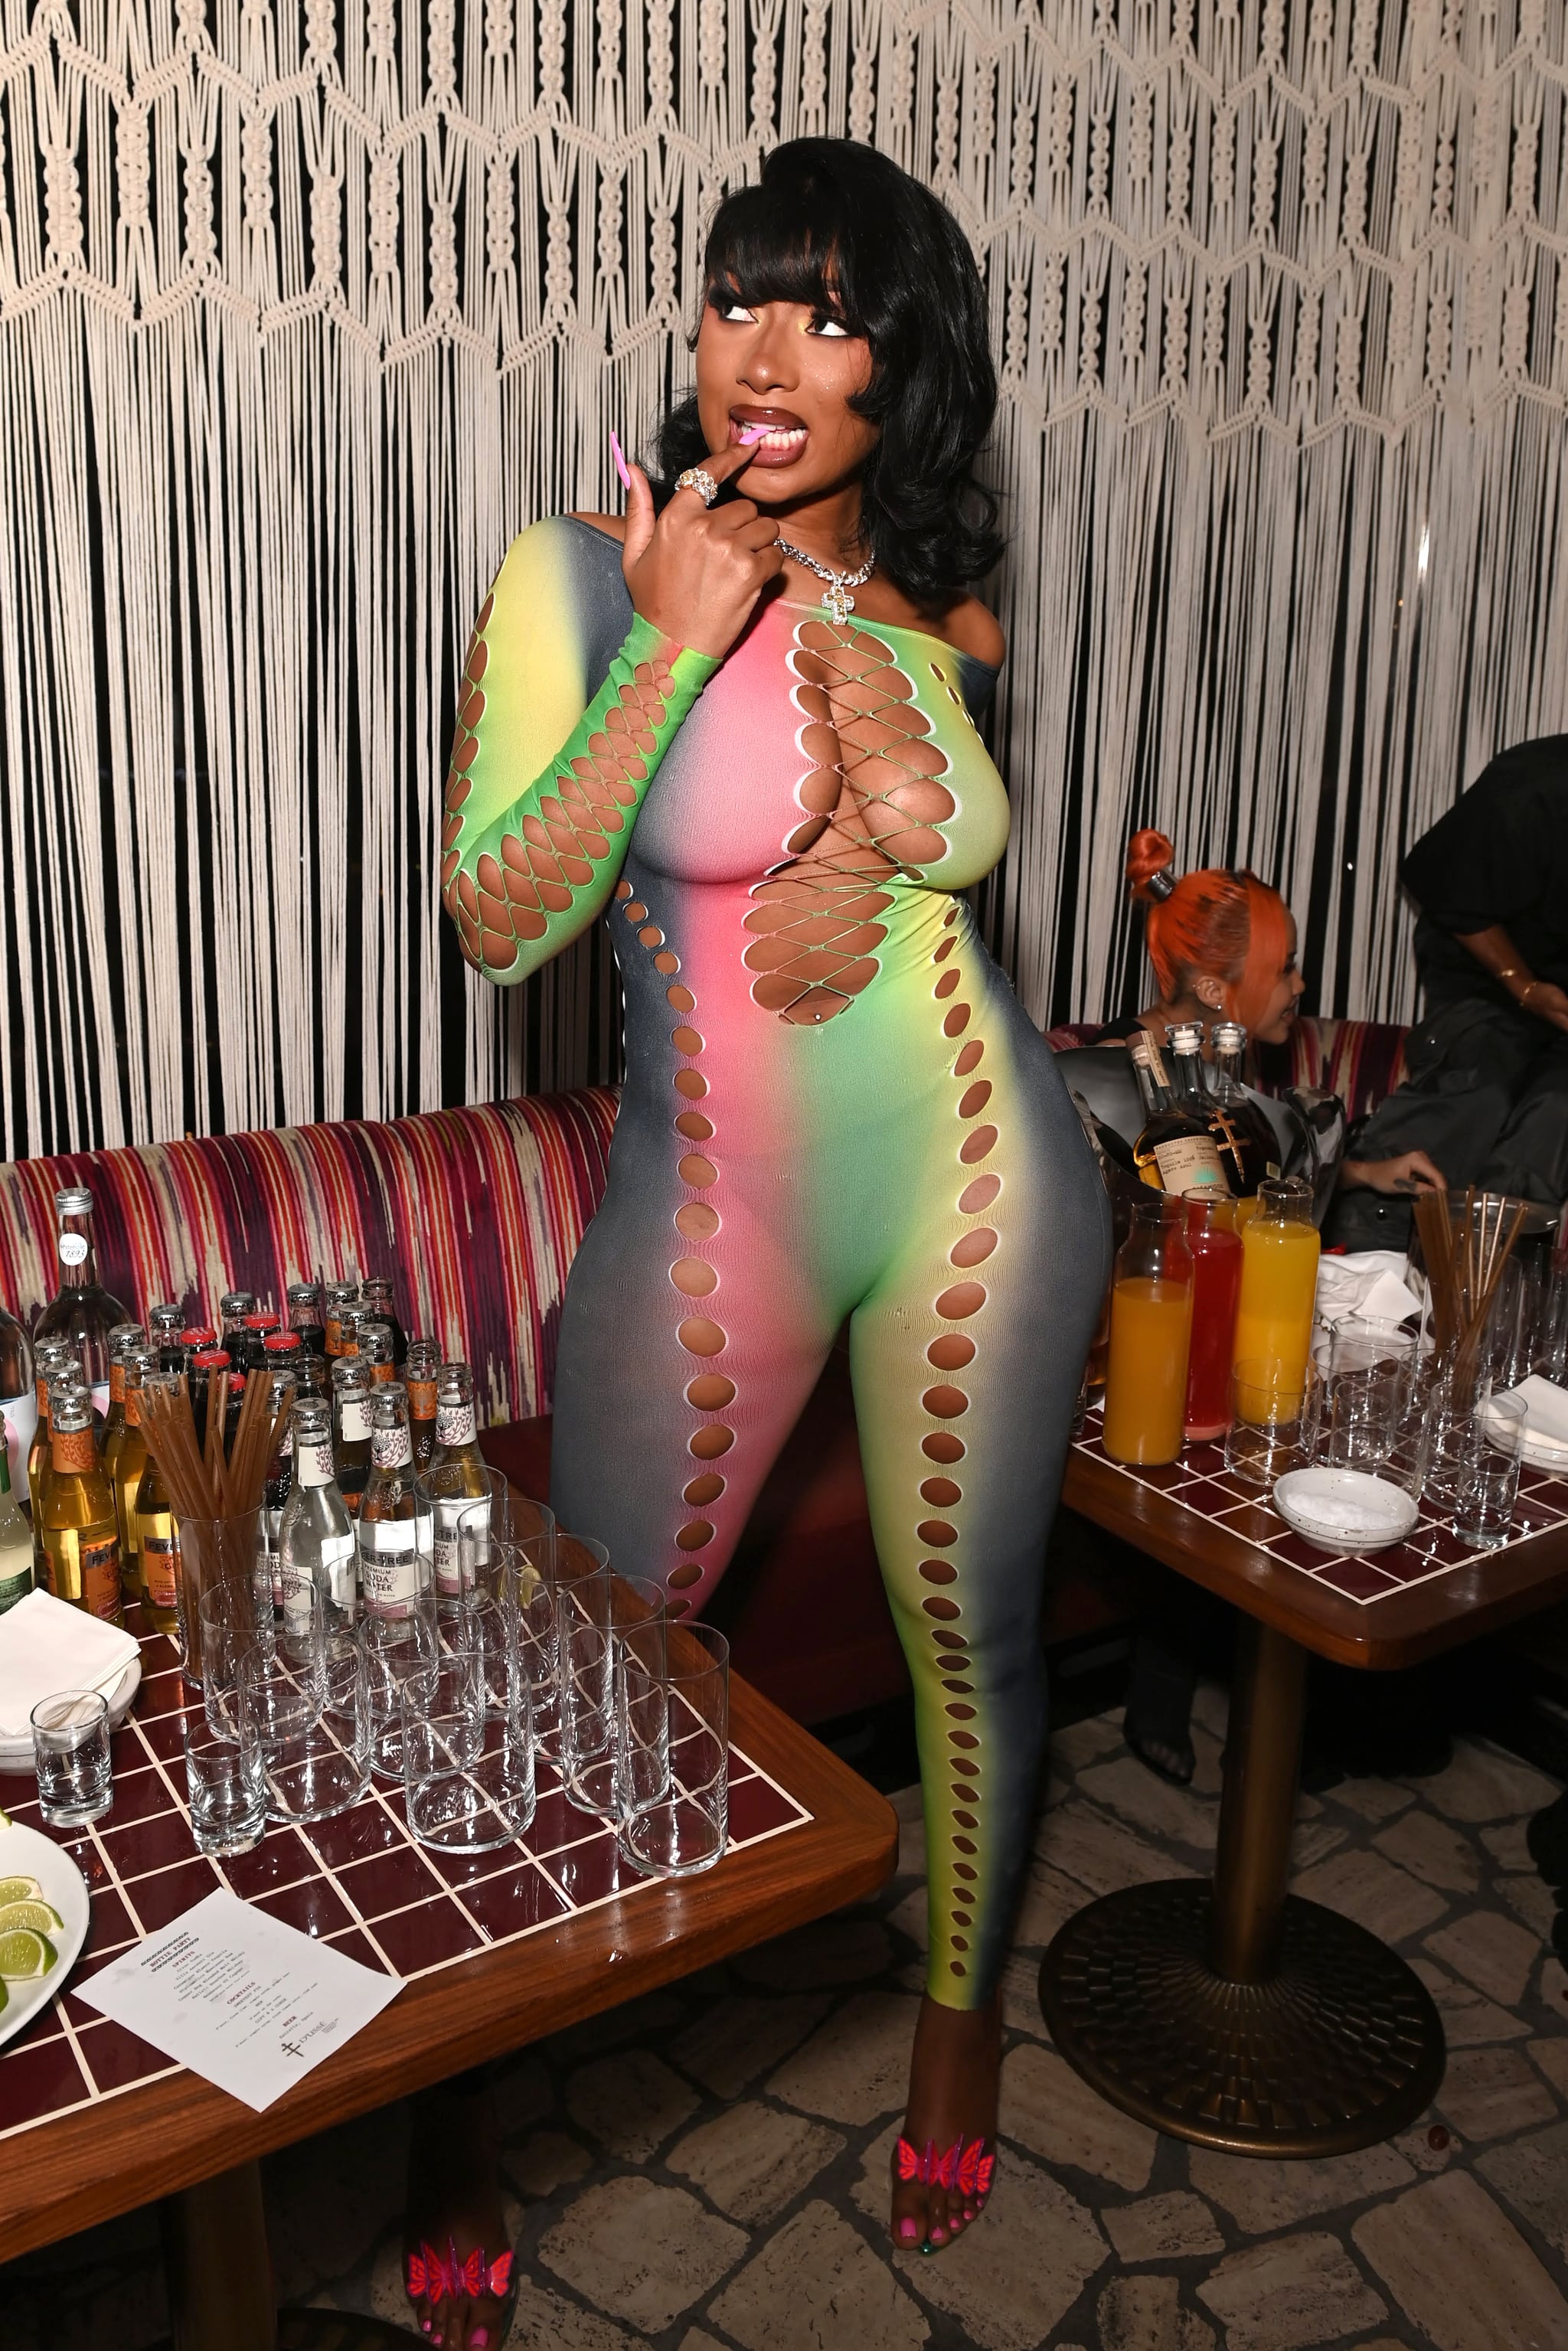 LONDON, ENGLAND - AUGUST 29: Megan Thee Stallion attends the Megan Thee Stallion Hottie Party in celebration of Traumazine on August 29, 2022 in London, England. (Photo by Kate Green/Getty Images for WMG )